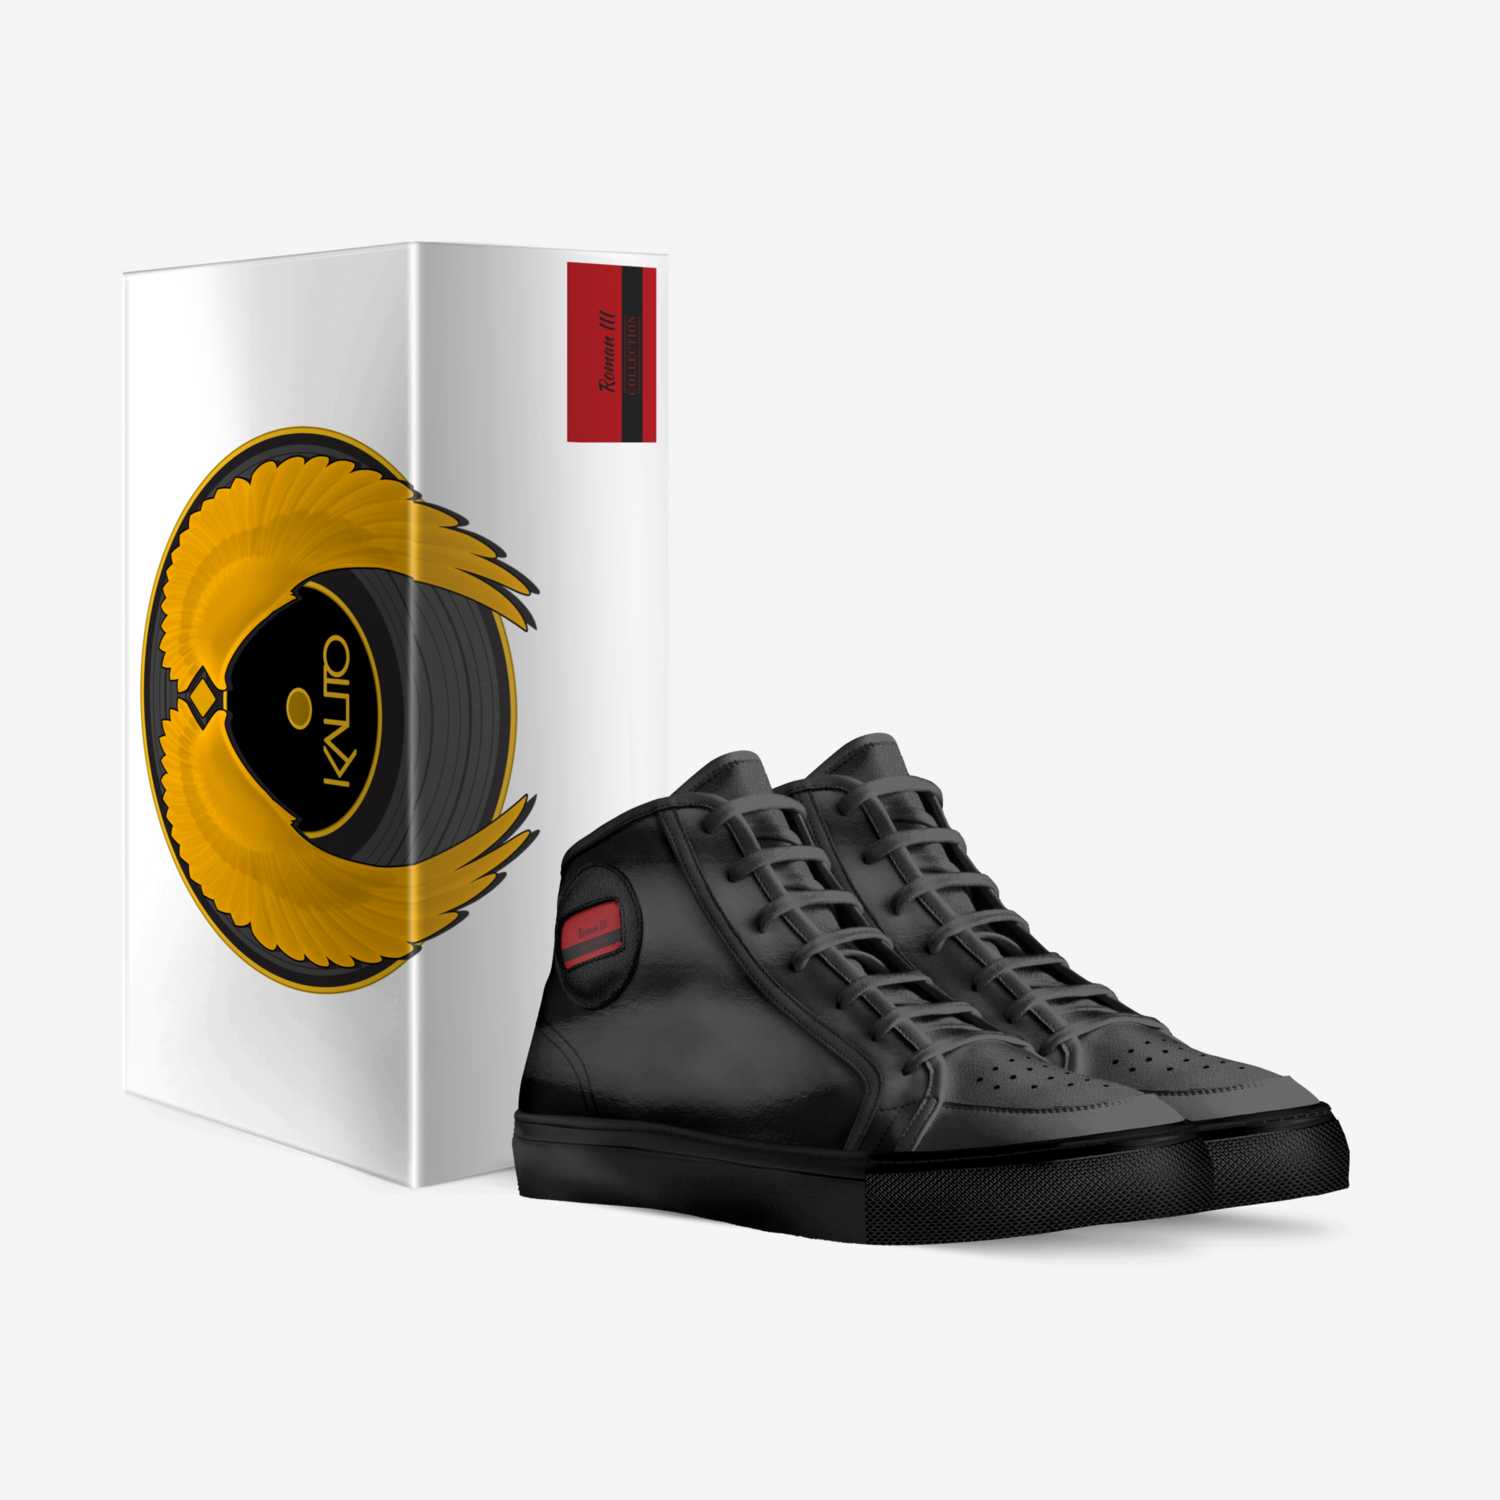 Roman III custom made in Italy shoes by Kalito Ayala | Box view